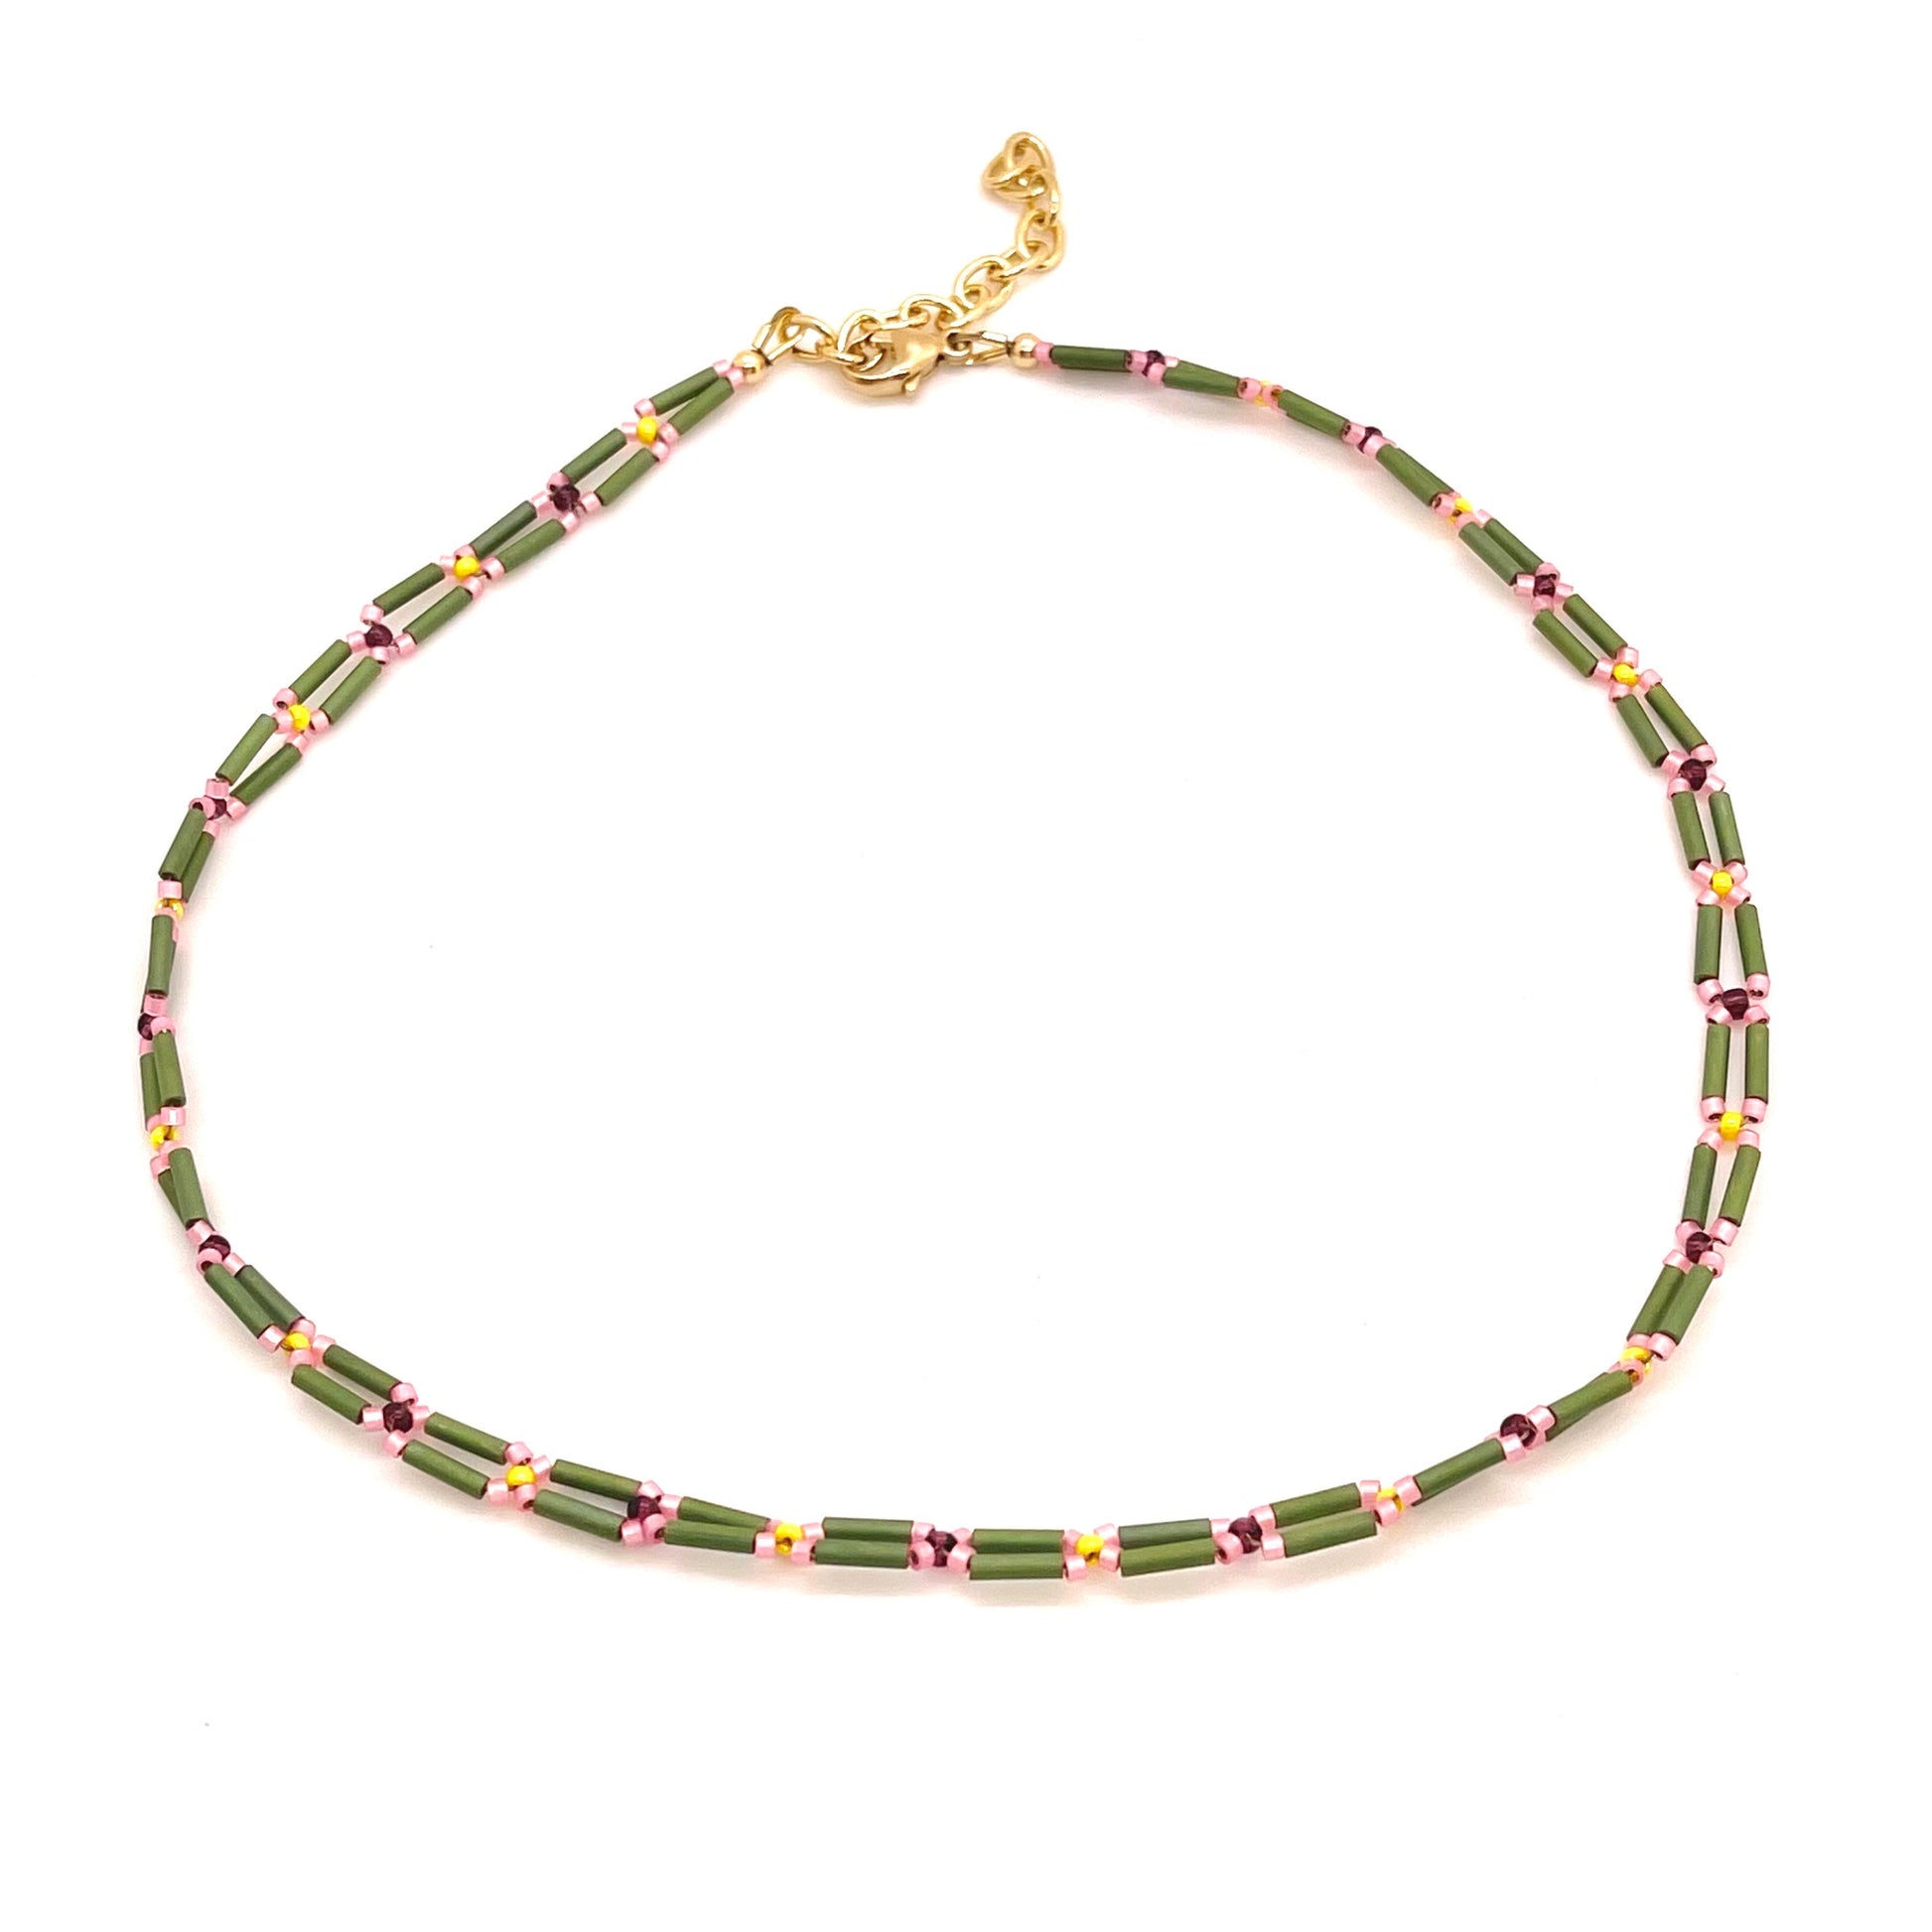 Green beaded necklace with 2 rows of bugle seed beads and pink beaded flowers. Handmade in NYC.